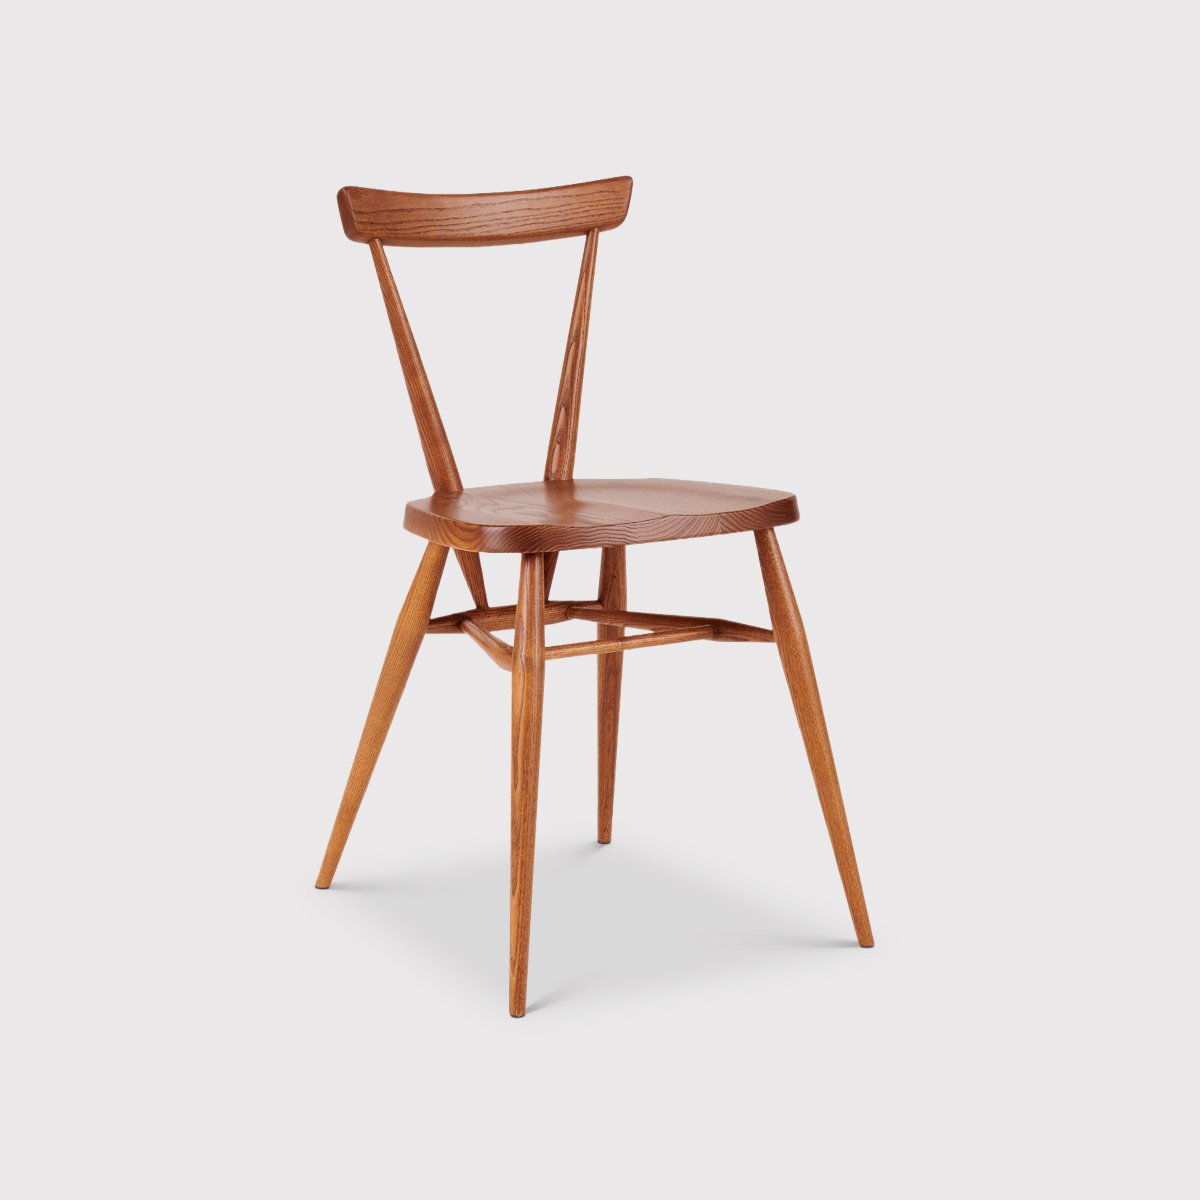 L.Ercolani Stacking Dining Chair, Brown | Barker & Stonehouse